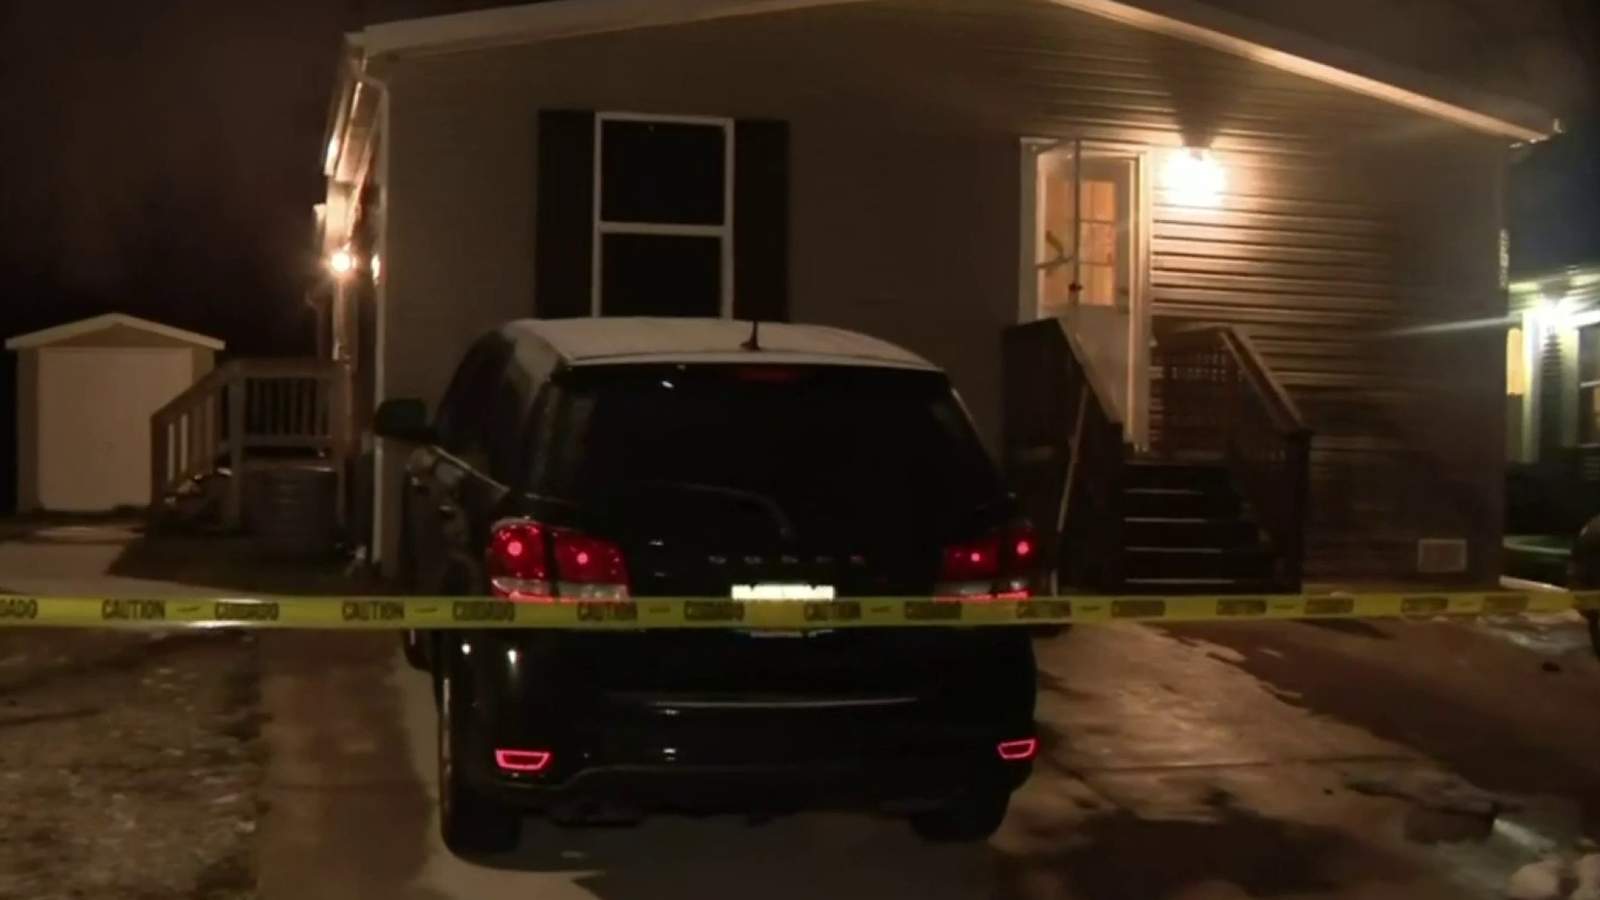 Man stabbed about 20 times inside Brownstown Township home, father says